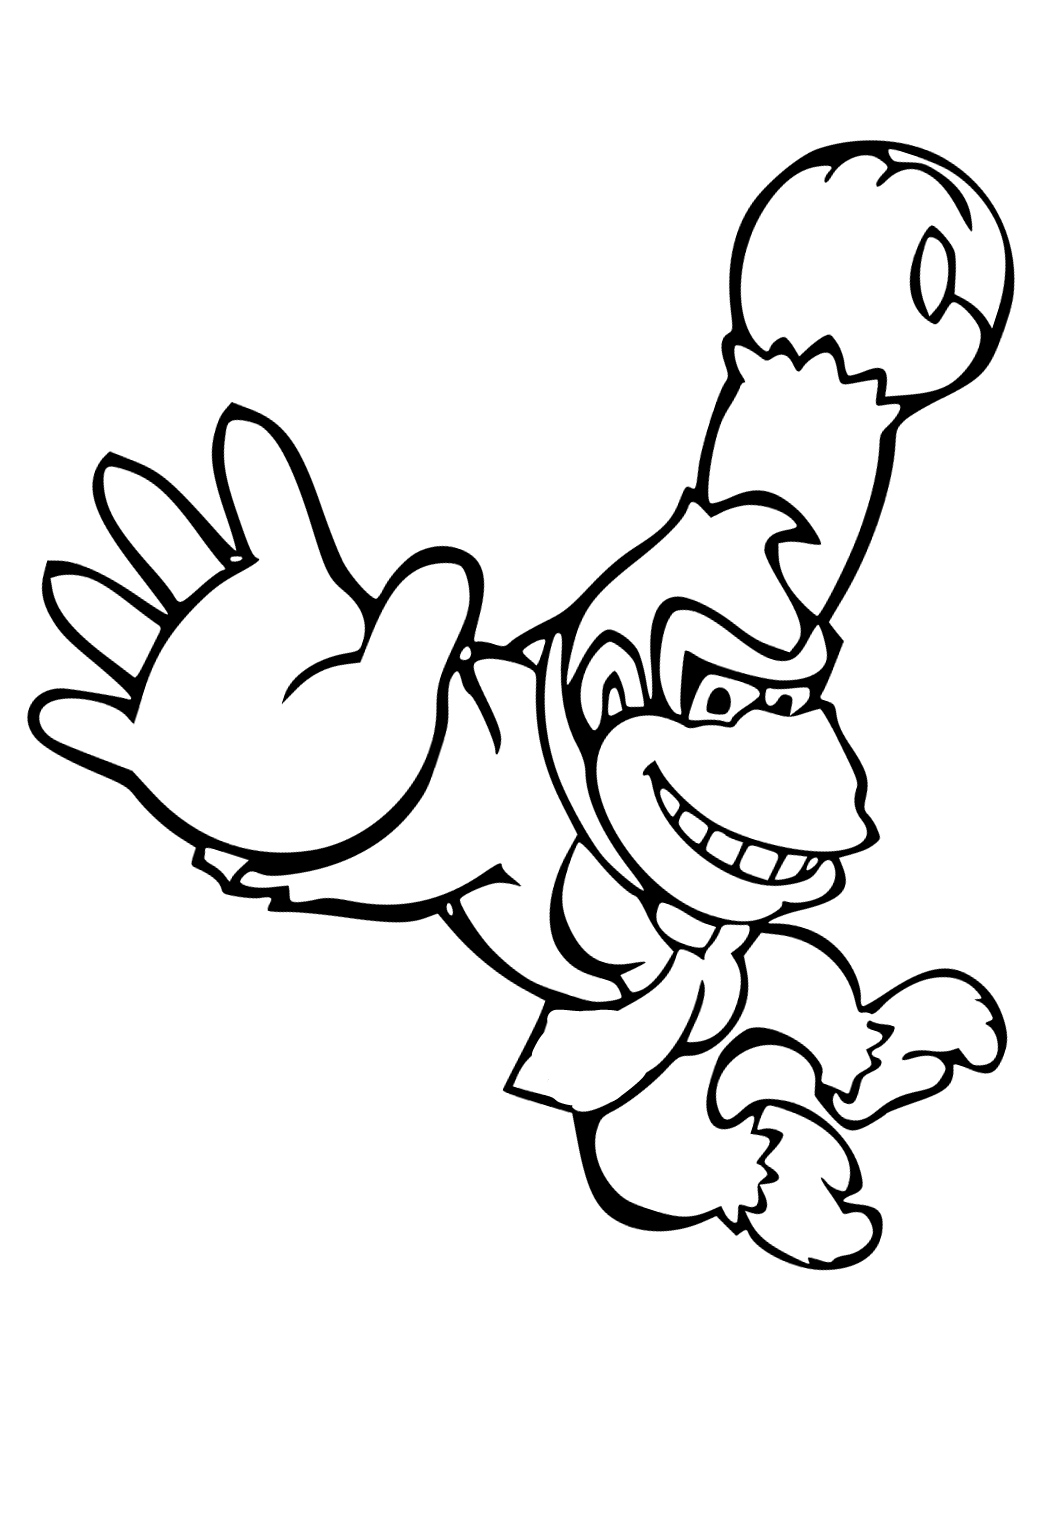 Free printable donkey kong jump coloring page for adults and kids